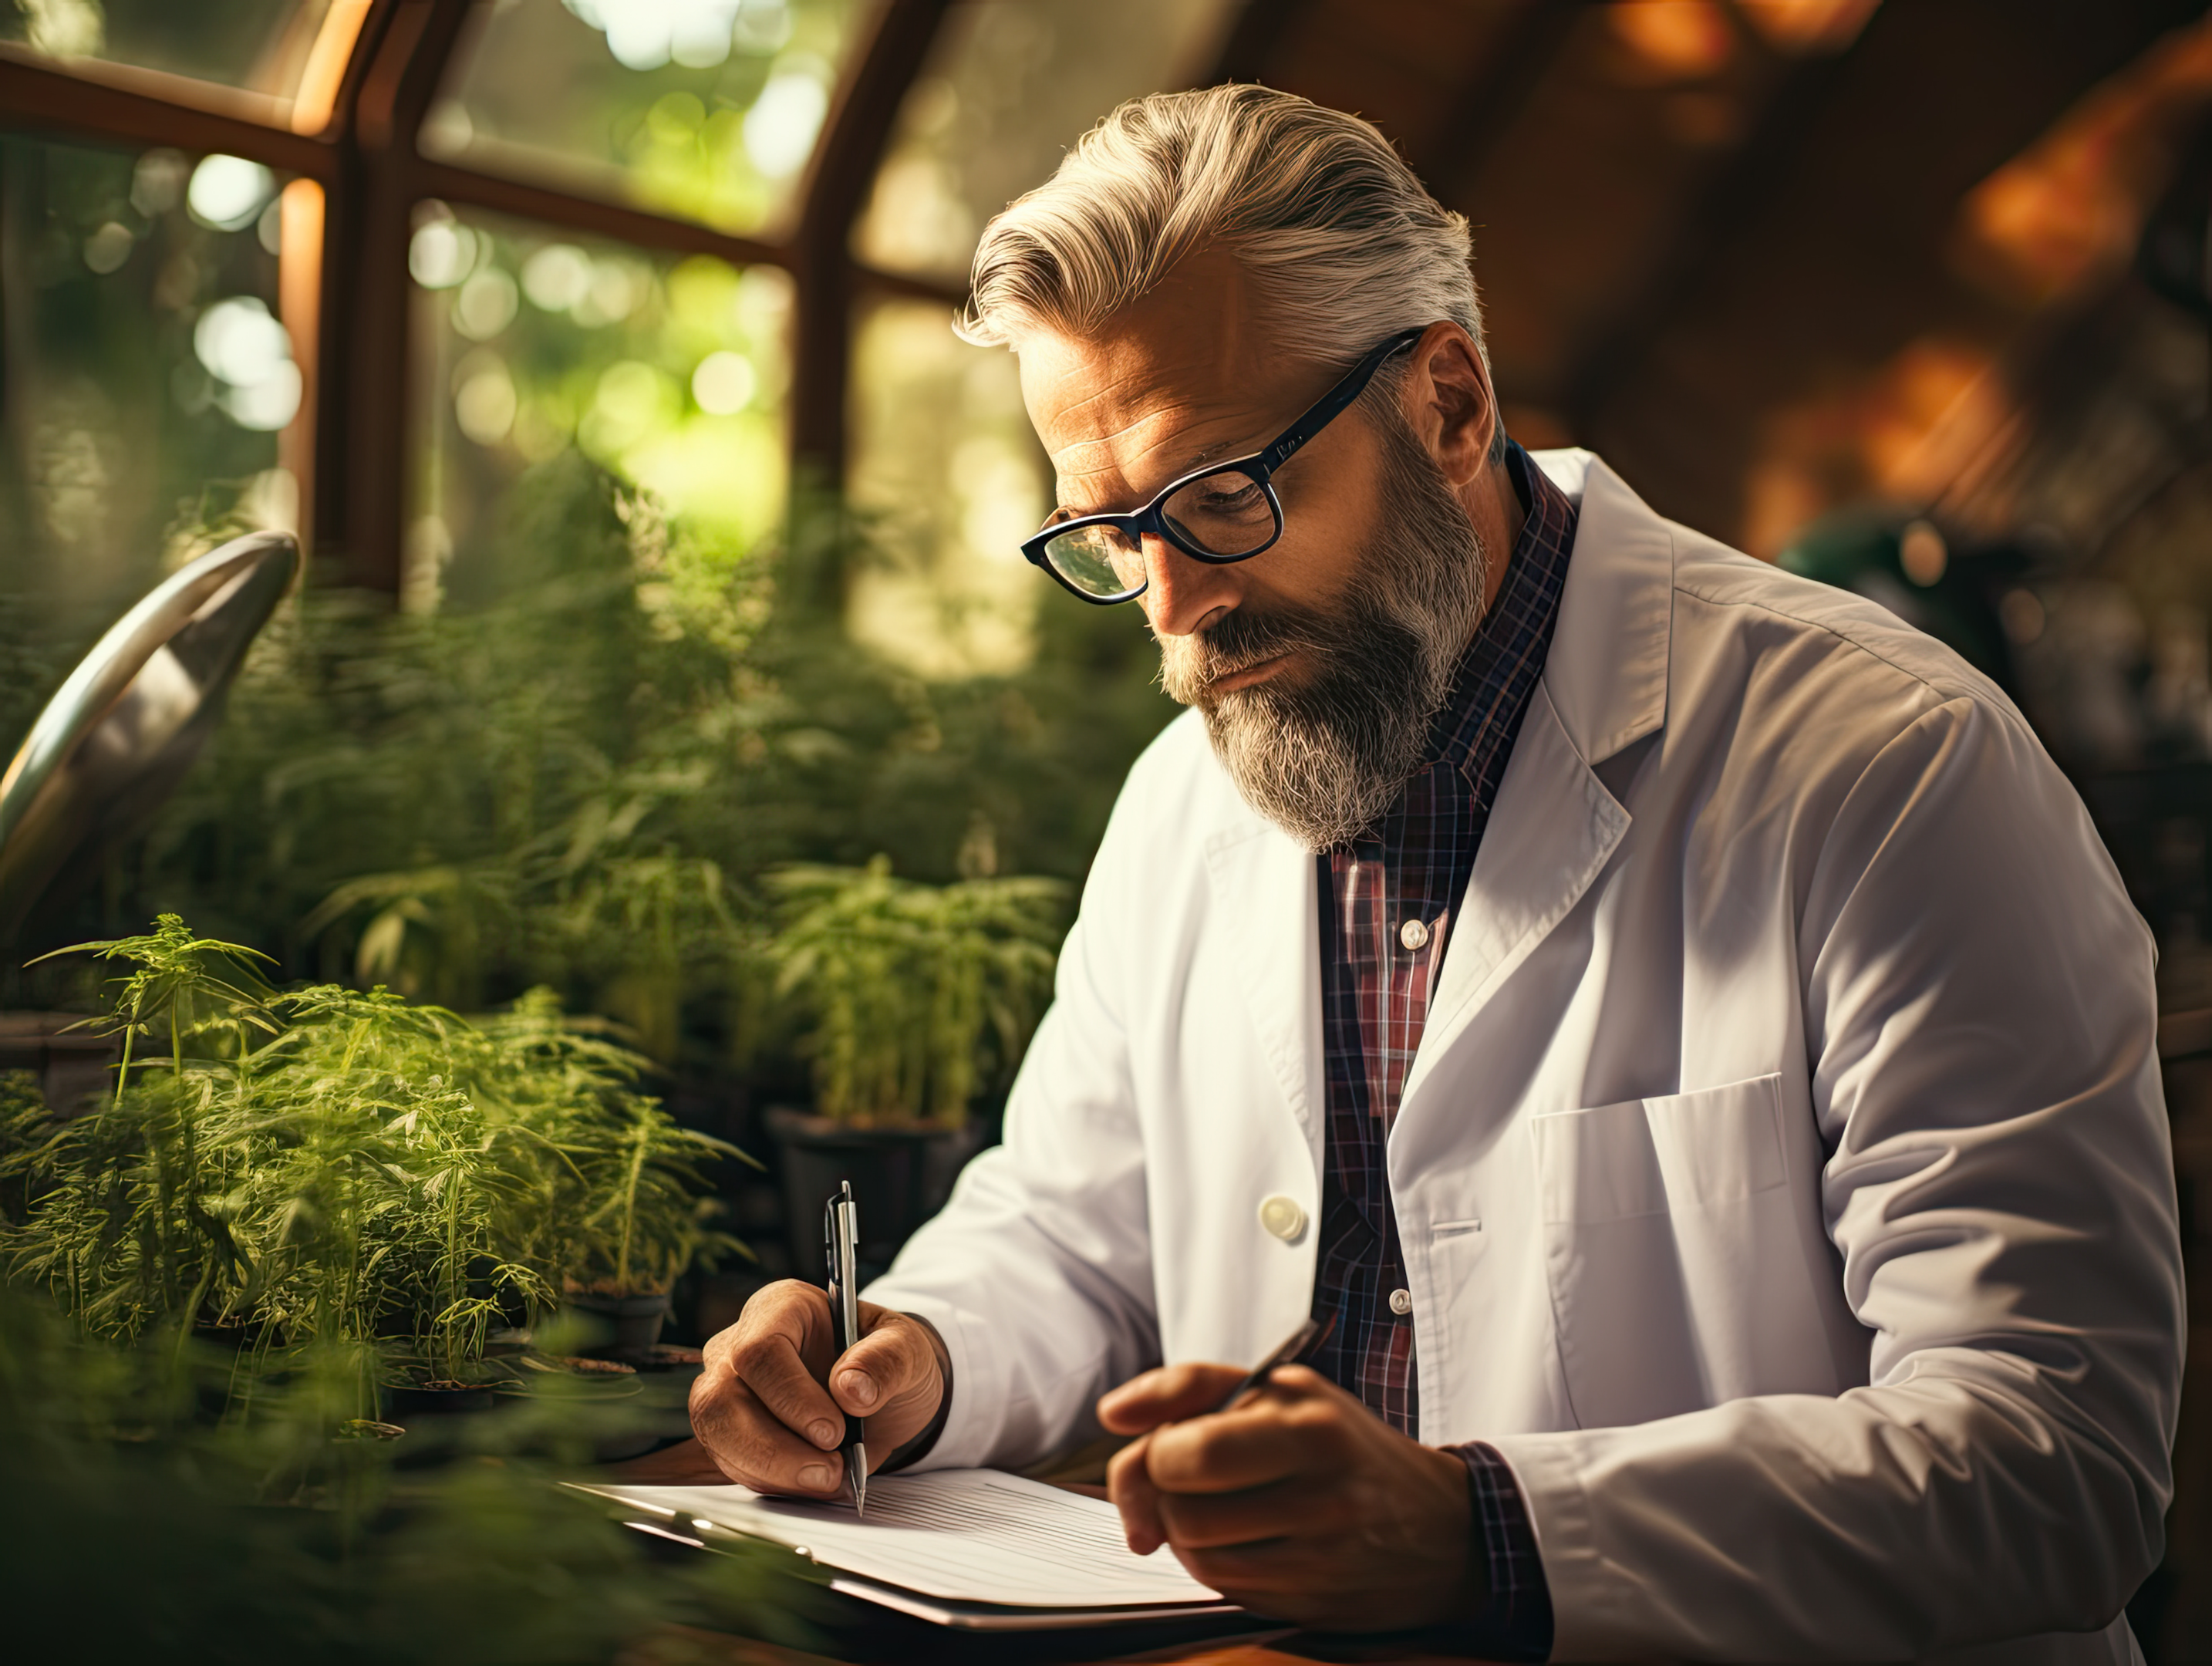 From HHC cannabis vaping to HHC gummies, researchers are still exploring things like a physiologically active product with potentially beneficial plant chemical compounds.